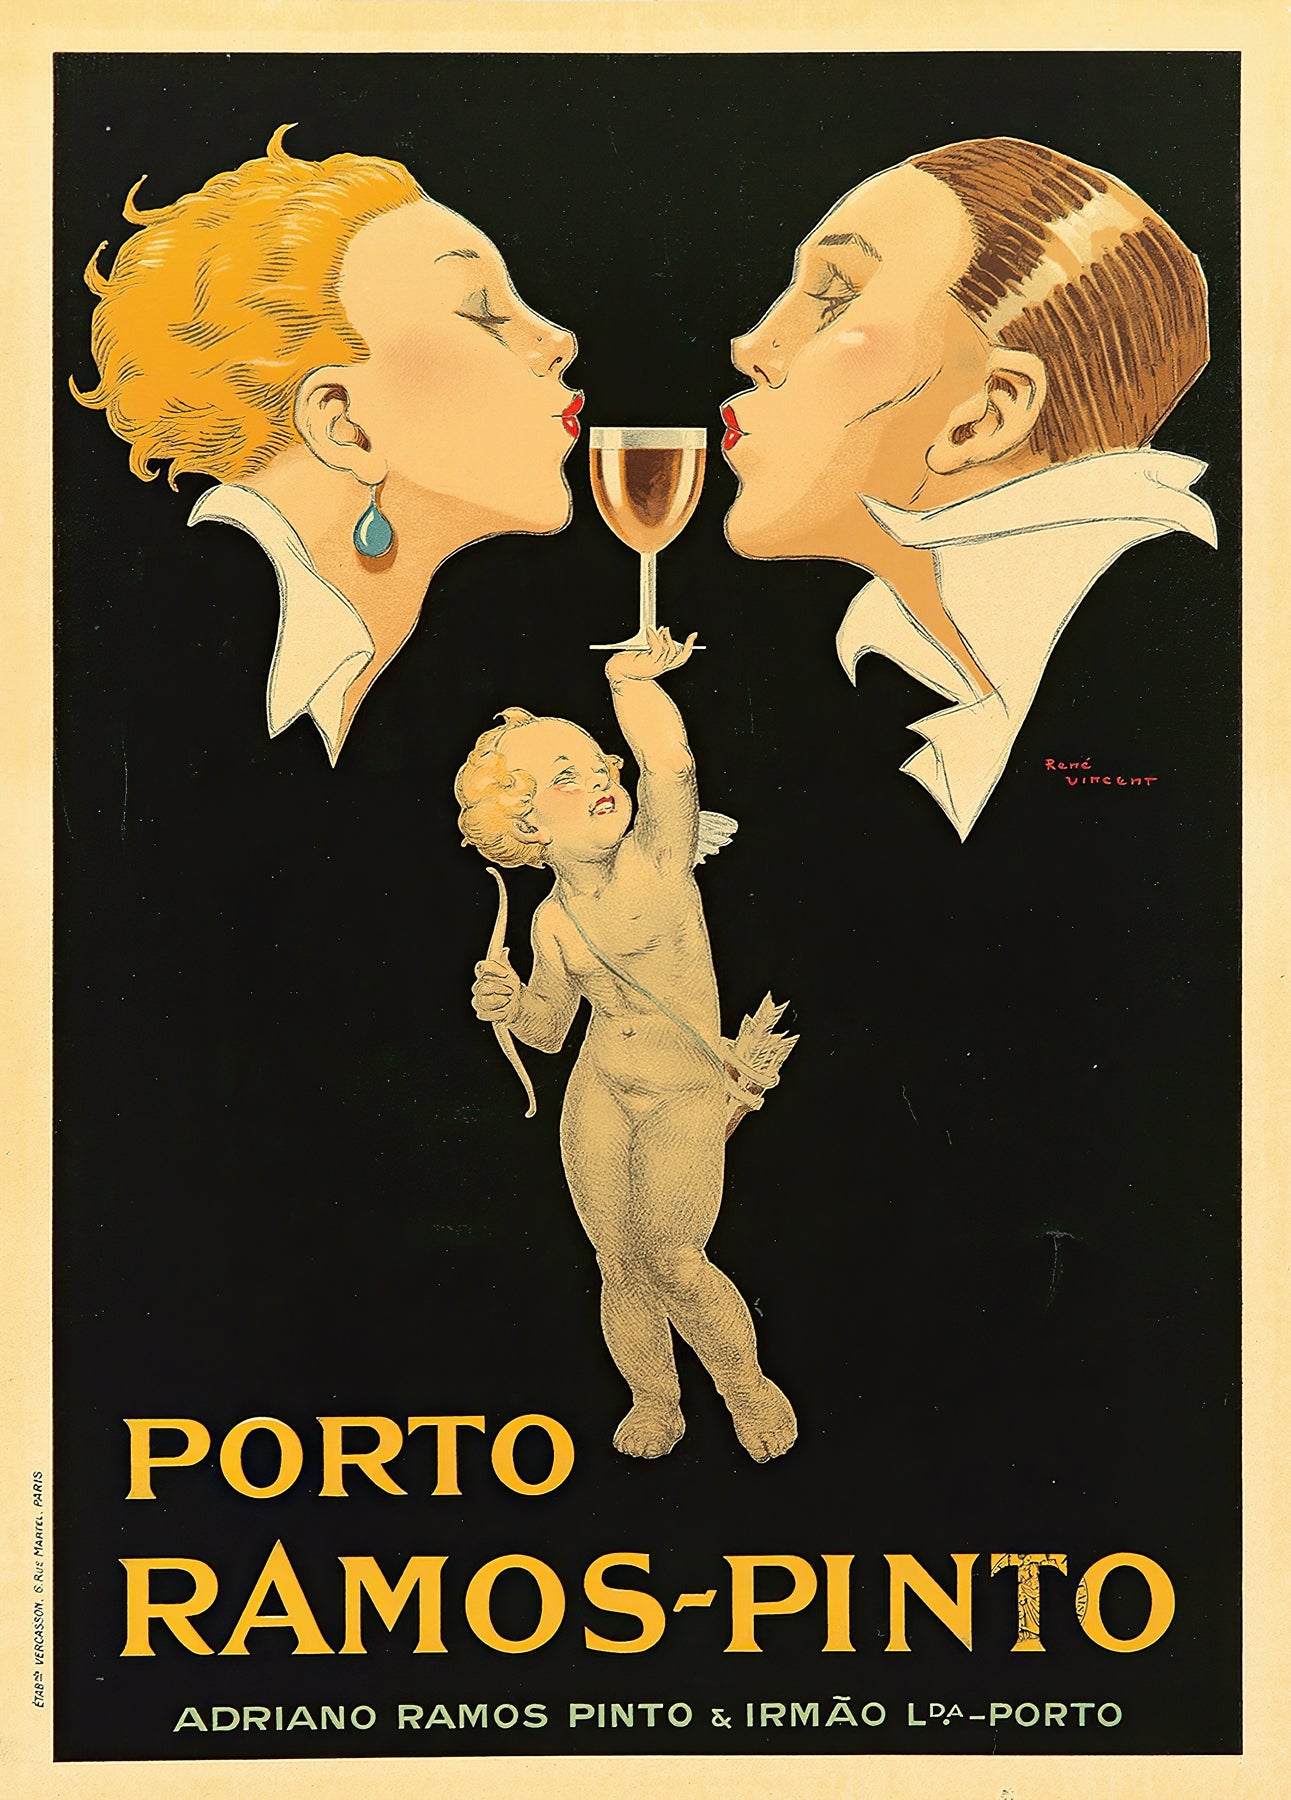 Ramos Pinto Port poster (1920s) | Vintage cocktail posters | Rene Vincent Posters, Prints, & Visual Artwork The Trumpet Shop   